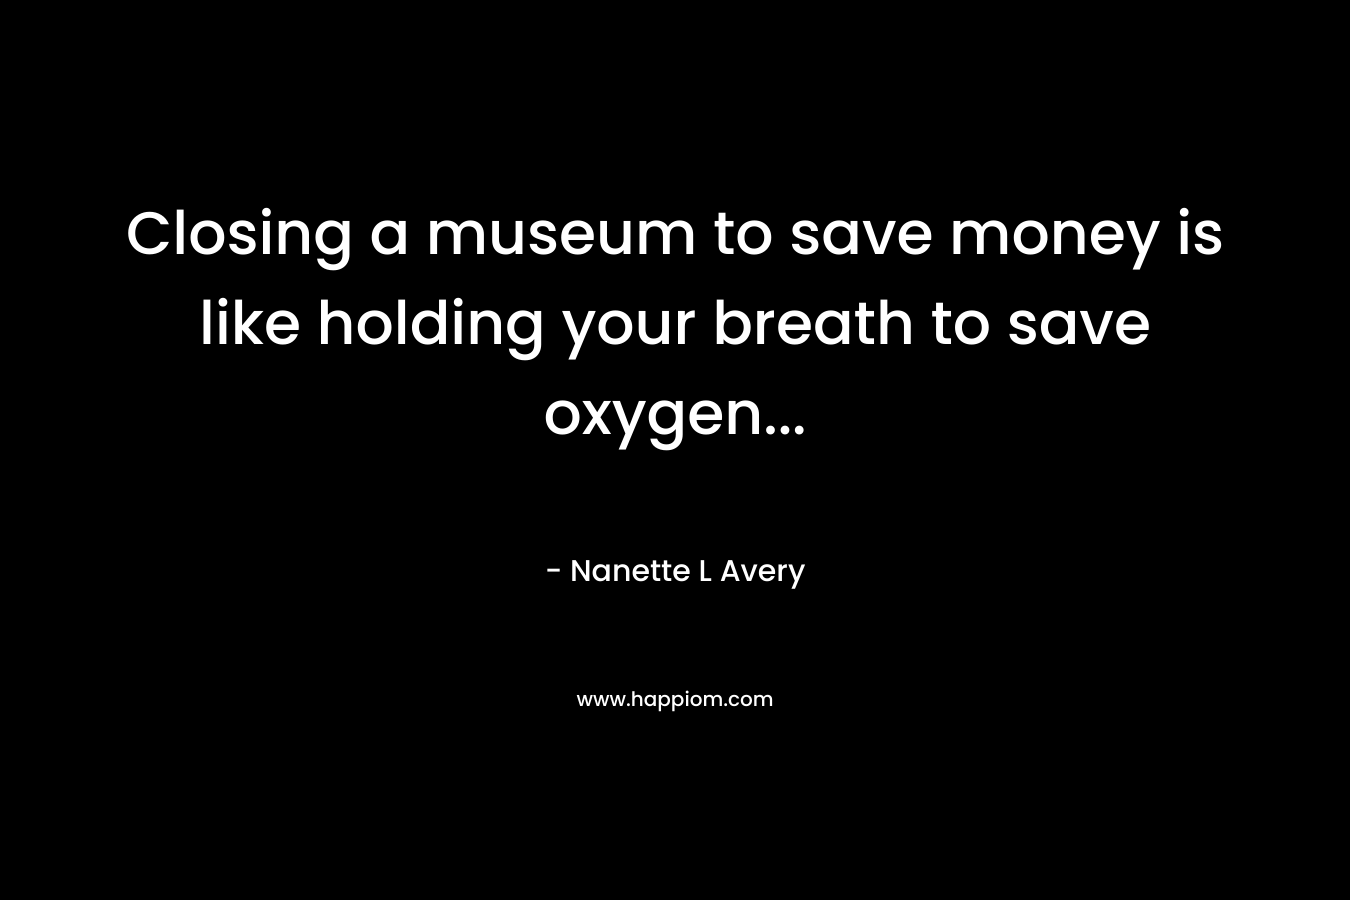 Closing a museum to save money is like holding your breath to save oxygen...